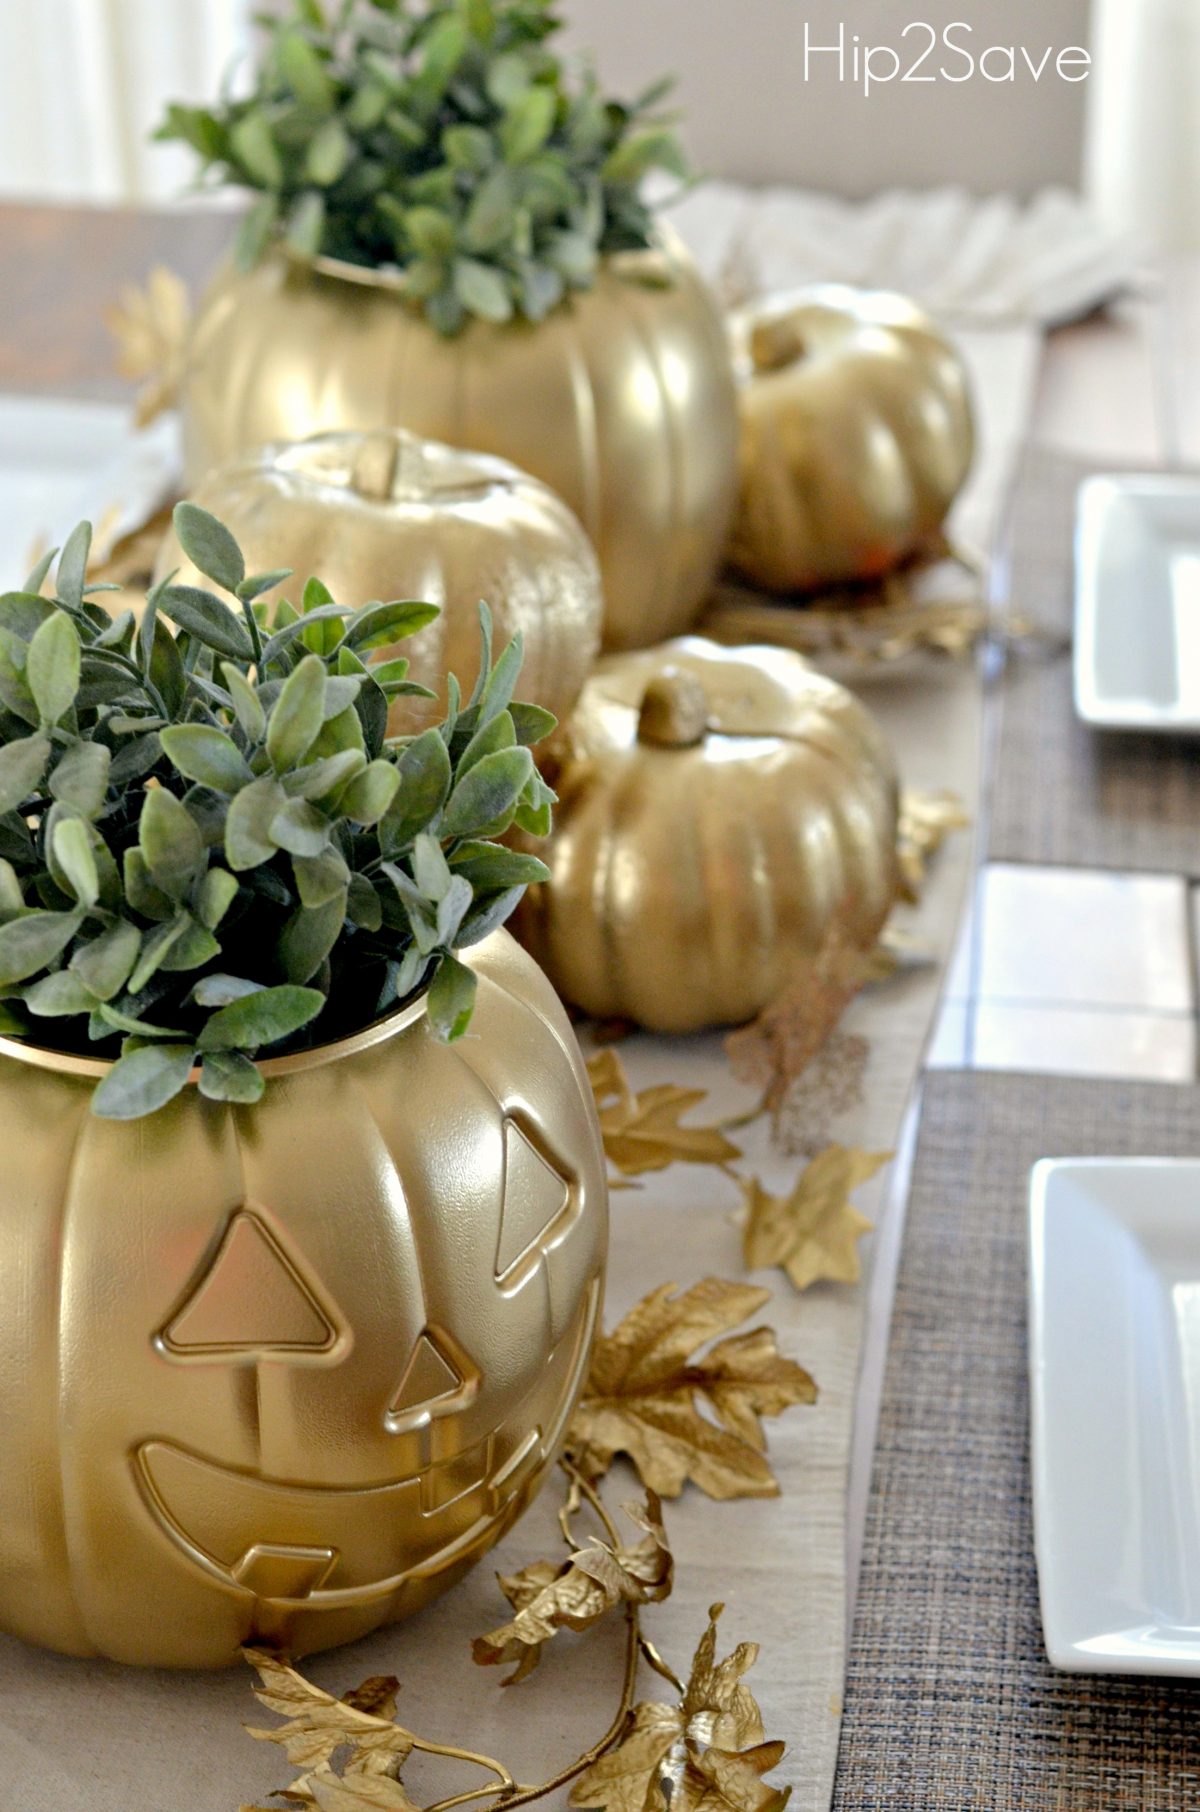 Budget-friendly dollar store fall decor with fall wreaths, autumn decorations, and stacked pumpkins for porch.